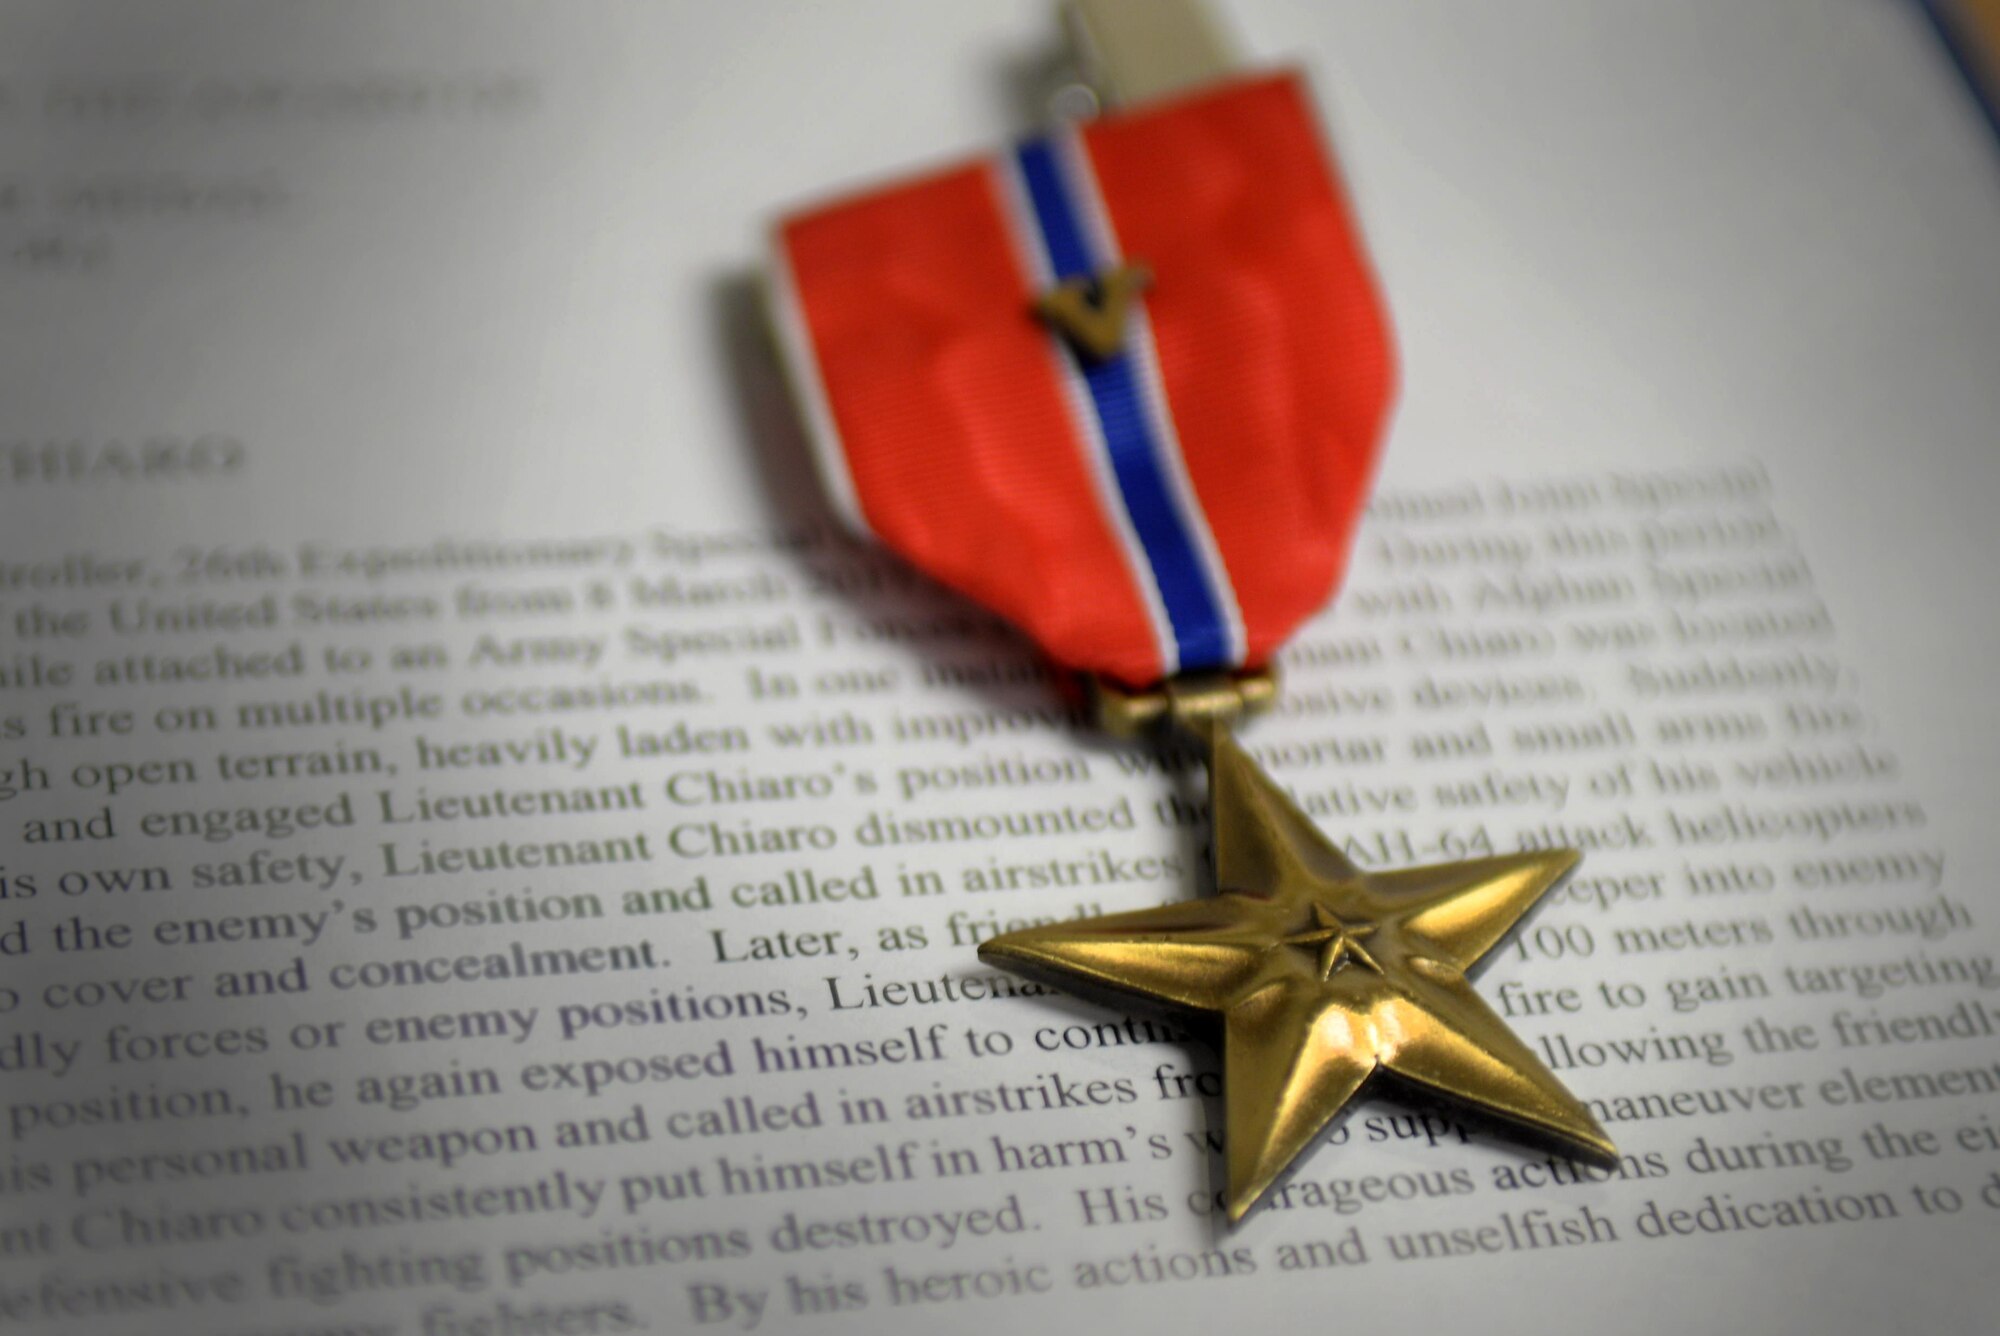 A Bronze Star Medal rests on a table during the award presentation ceremony for three Air Commandos from the 352d Special Operations Wing June 27, 2017, on RAF Mildenhall, England. The Medal is awarded to any person who, after December 6, 1941, while serving in any capacity with the Armed Forces of the United States, distinguishes himself or herself by heroic or meritorious achievement or service, not involving participation in aerial flight. (U.S. Air Force photo by Airman 1st Class Tenley Long)